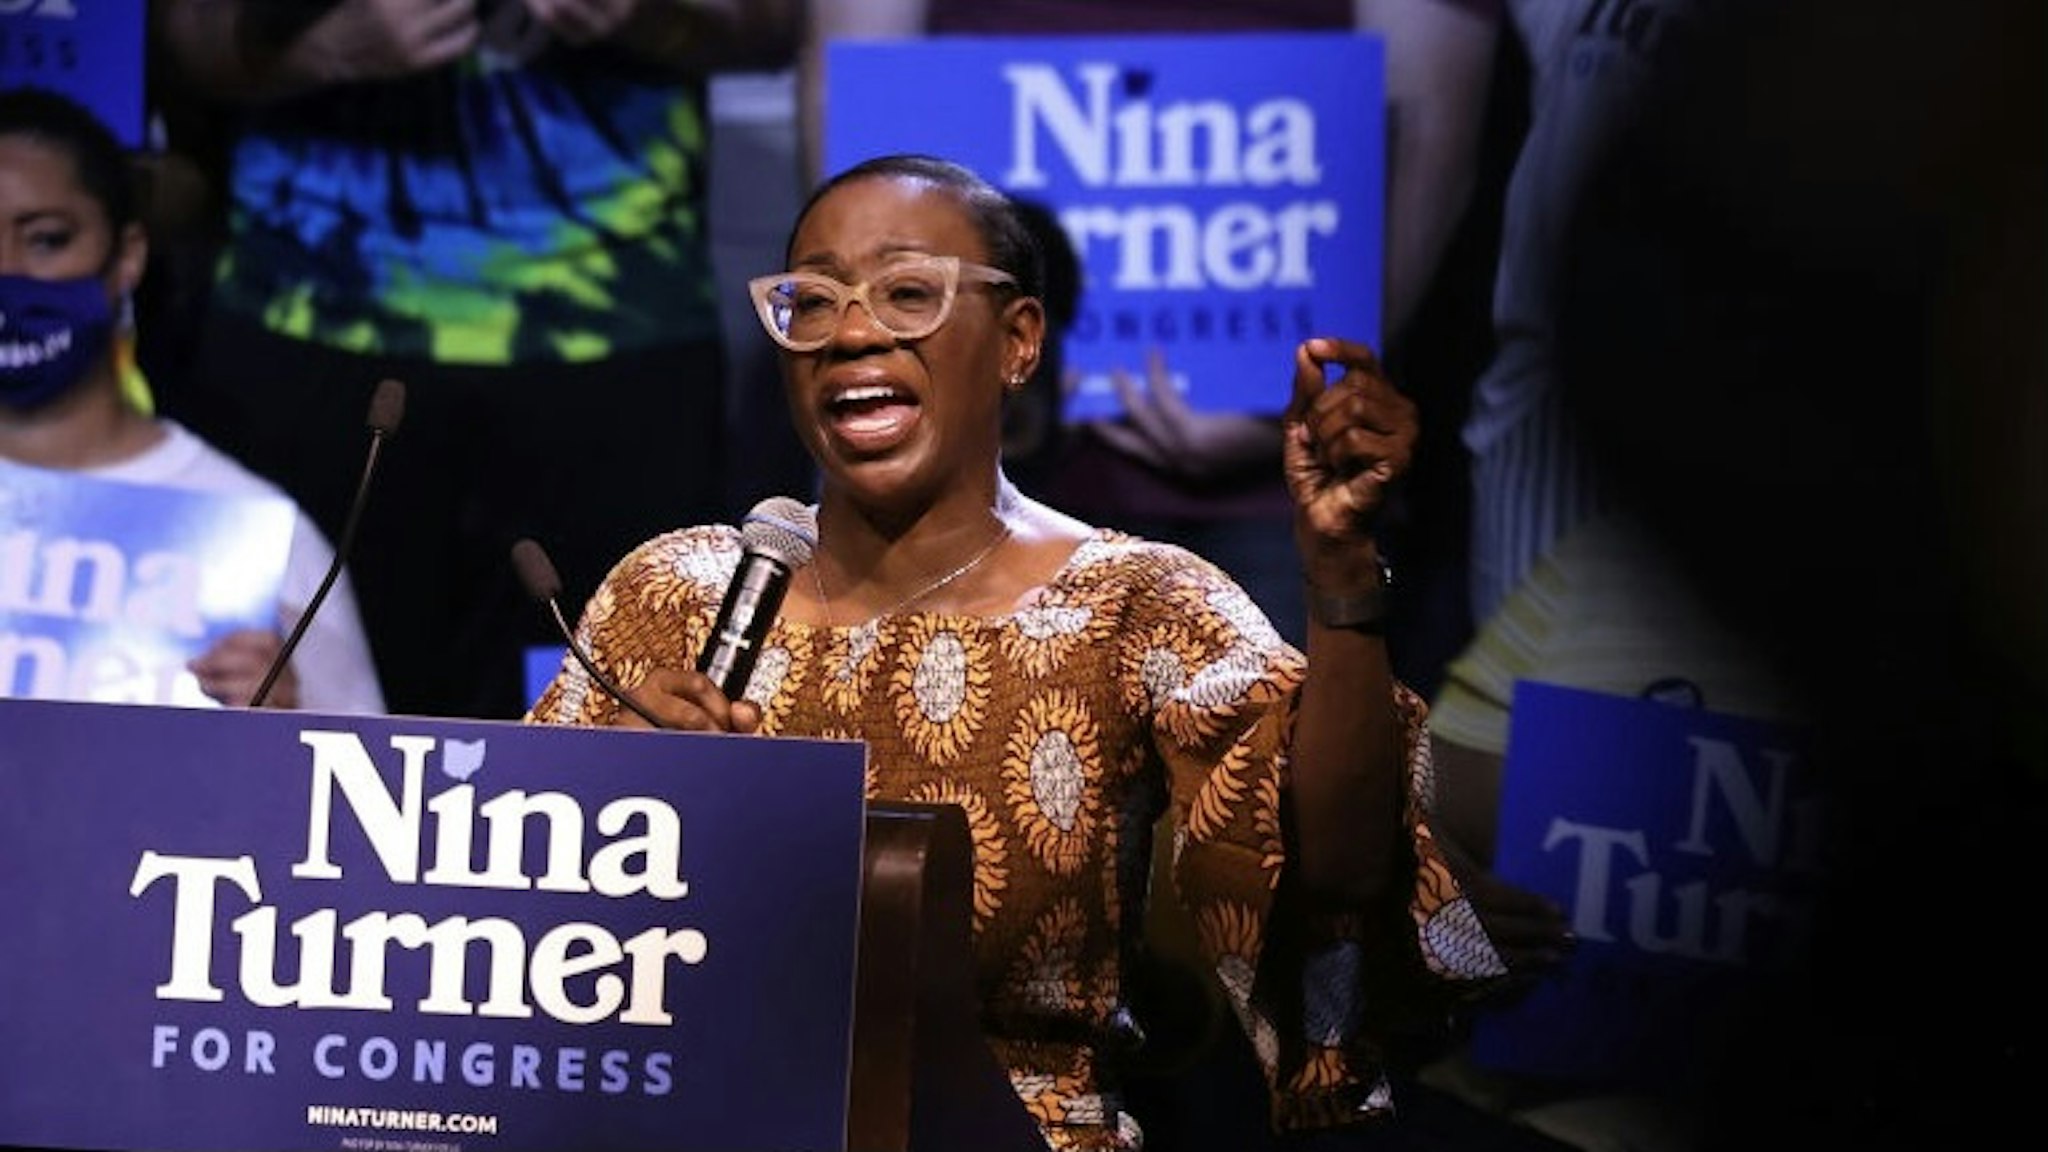 Nina Turner Campaigns Ahead Of Special Democratic Primary In Ohio's 11th Congressional District CLEVELAND, OHIO - JULY 31: Congressional Candidate Nina Turner speaks during a Get Out the Vote rally at Agora Theater & Ballroom on July 31, 2021 in Cleveland, Ohio. Congressional Candidate Nina Turner was joined by Sen. Bernie Sanders (I-VT), Minnesota Attorney General Keith Ellison, and Dr. Cornell West for a GOTV campaign rally on the final weekend of early voting before Tuesdays Primary Special Election for Ohio's 11th Congressional District primary were Turner and Cuyahoga Councilwoman Shontel Brown are the frontrunners ahead of 11 other Democratic candidates in the race. The rally was followed by a march to the Board of Elections office. The special election was triggered after former Rep. Marcia Fudge, joined the Biden administration to become the U.S. Secretary of Housing and Urban Development. (Photo by Michael M. Santiago/Getty Images) Michael M. Santiago / Staff via Getty Images